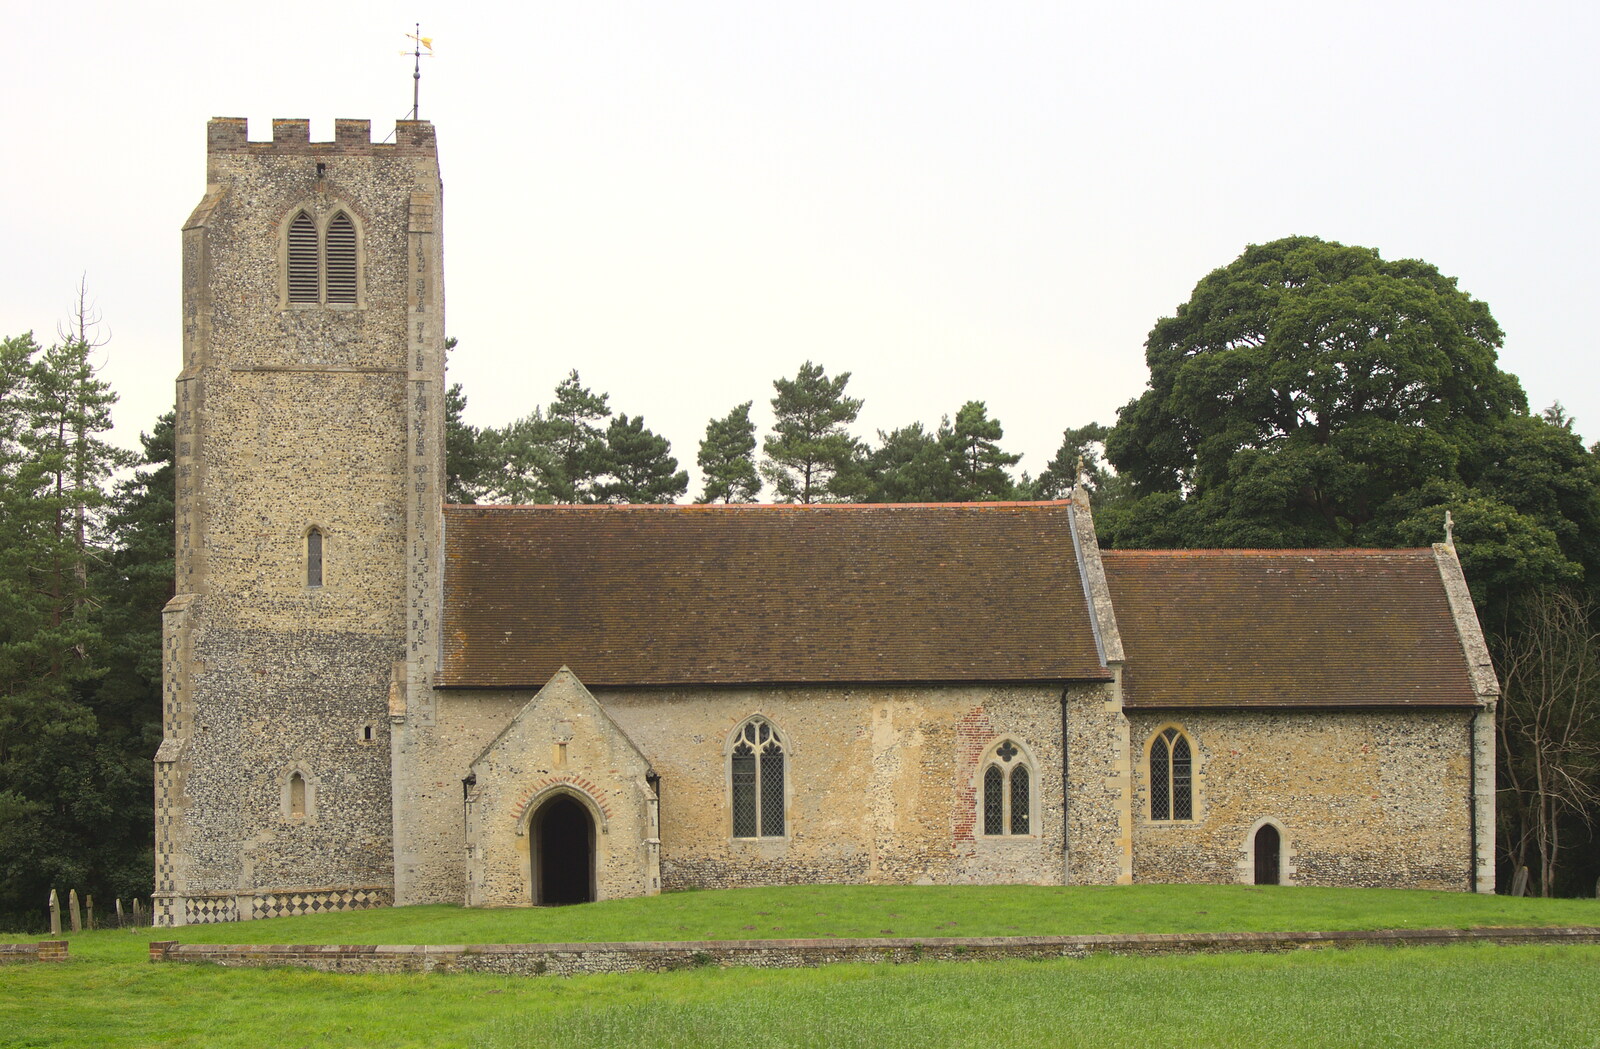 A side view of the church from Camping at Dower House, West Harling, Norfolk - 1st September 2012